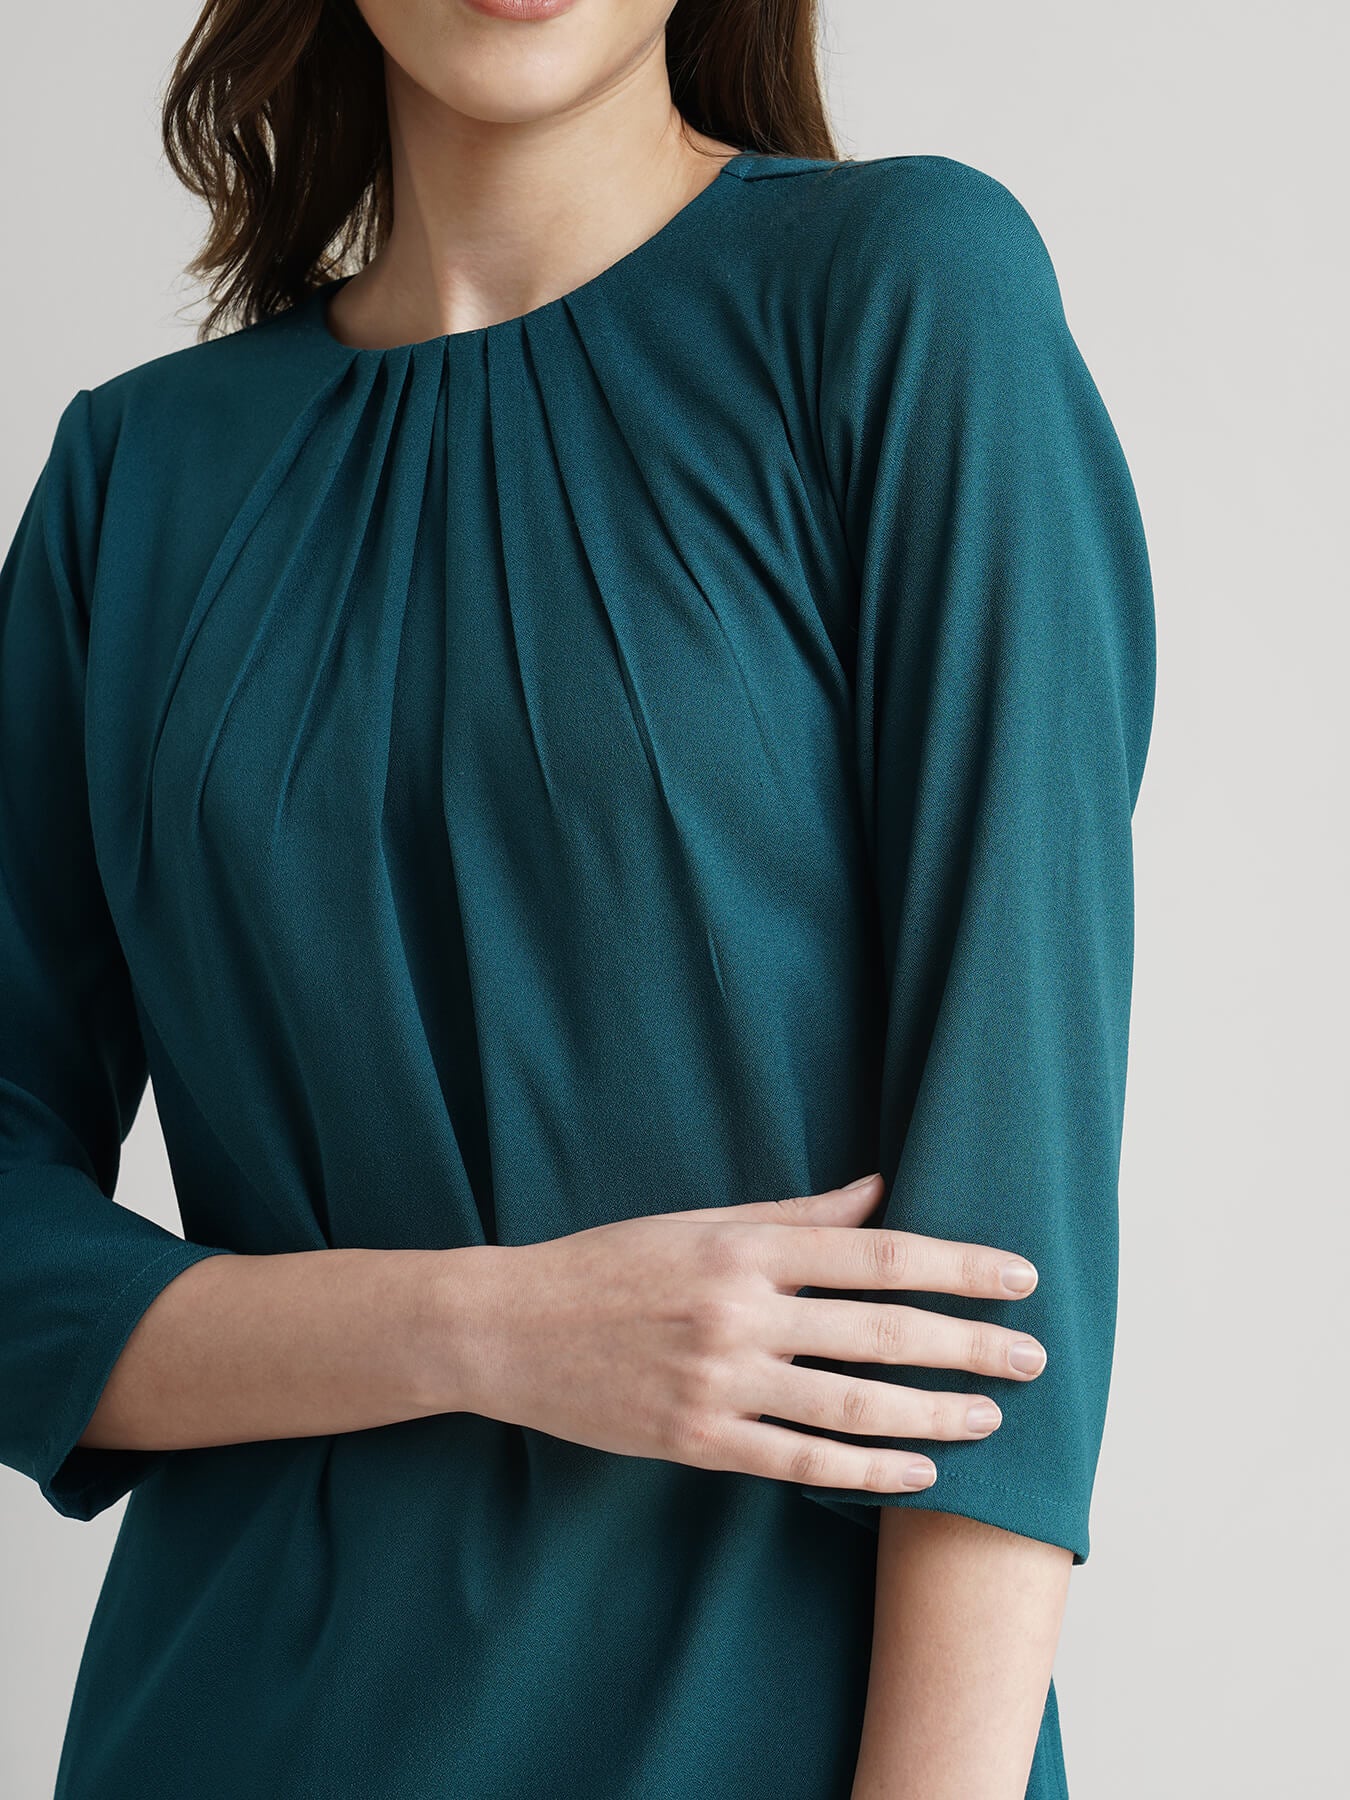 Front Pleat Shift Dress - Teal